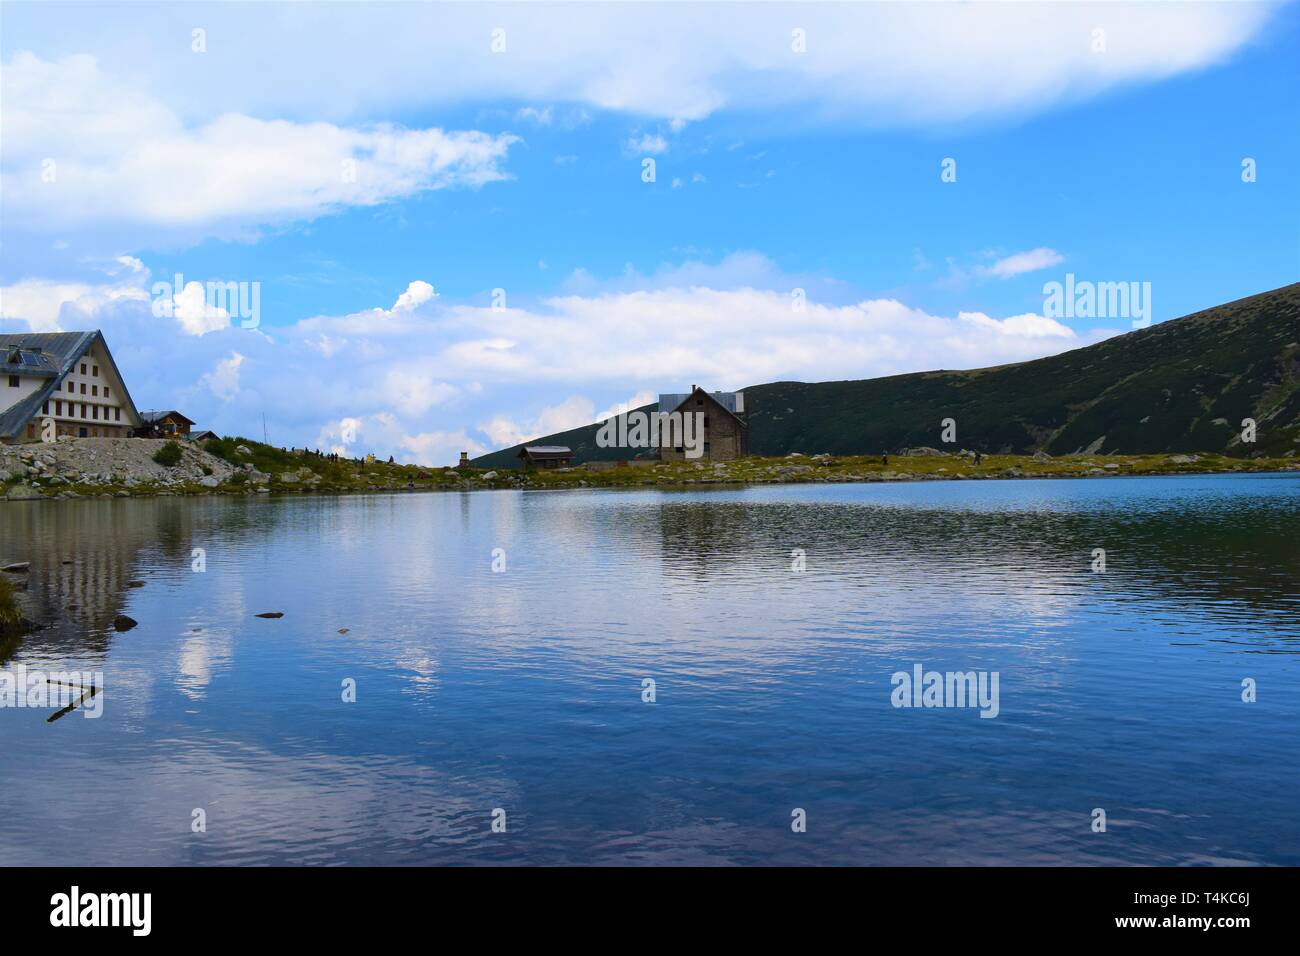 A beautiful lanscape near the highest peak in Balkan peninsula, Musala peak - a mountain with two cabins on the background and a lake in front of them Stock Photo